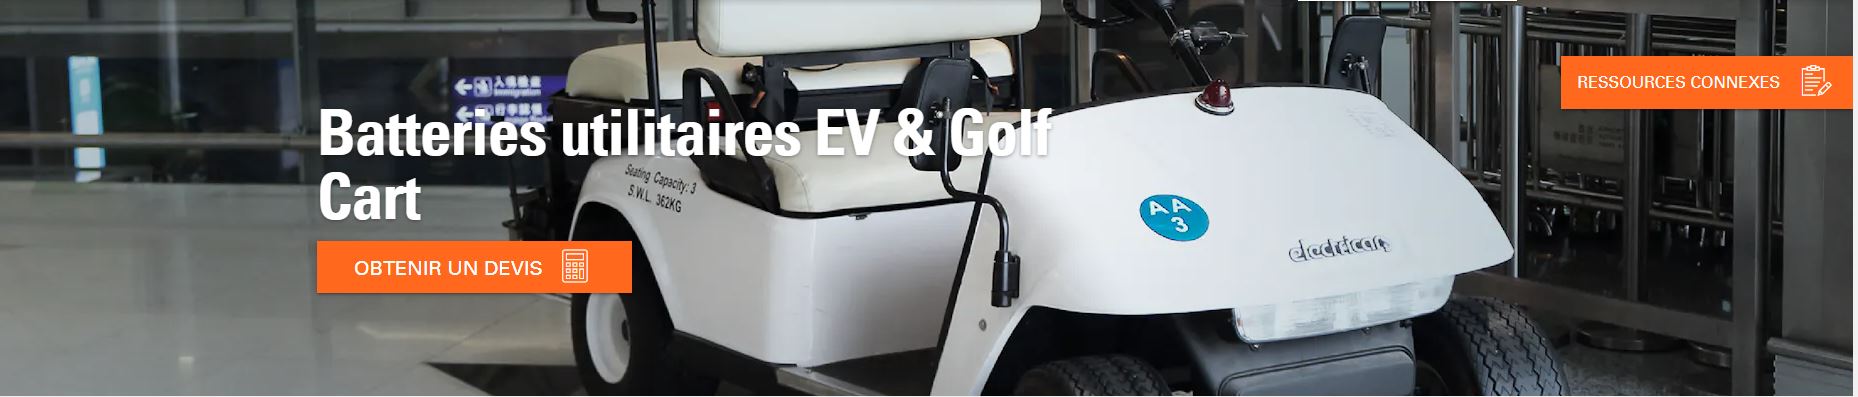 vehicule-electric-golfette-discover-battery-accus-plus